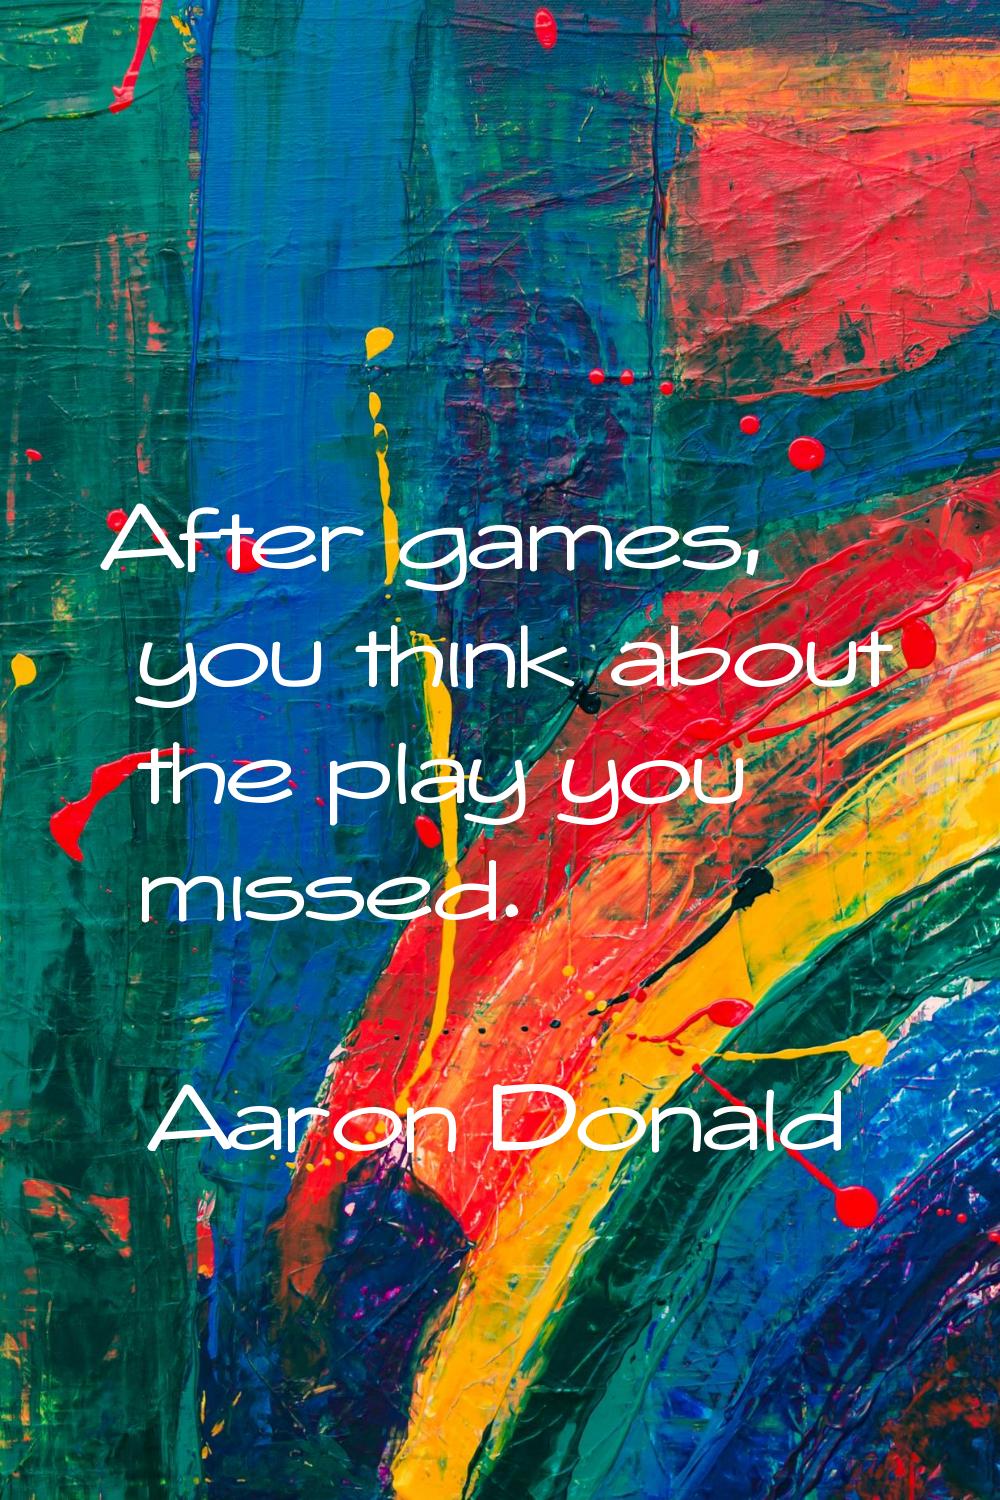 After games, you think about the play you missed.